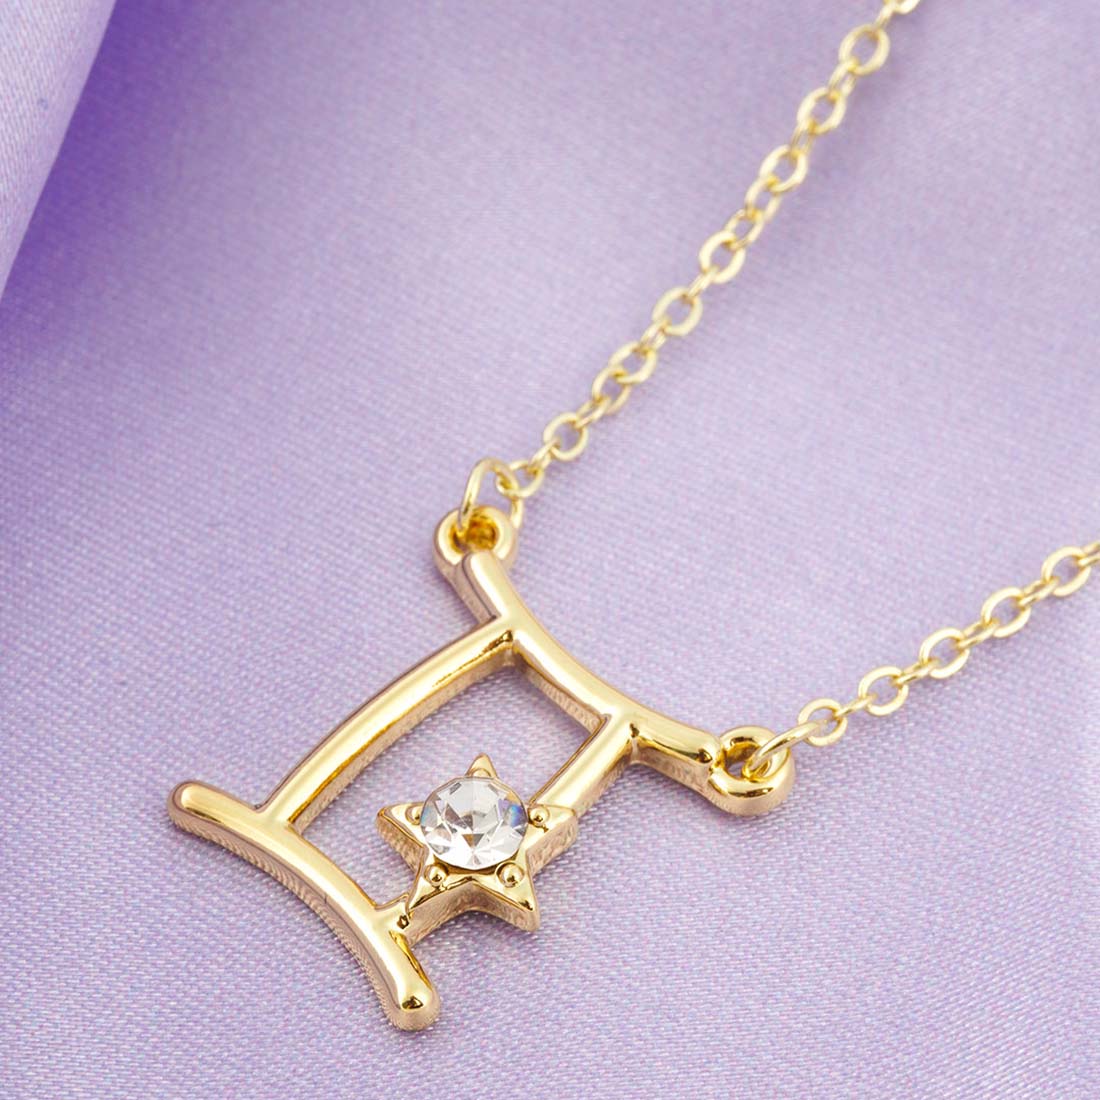 Gold-Toned White Stone-Studded Star Gemini Pendant With Chain